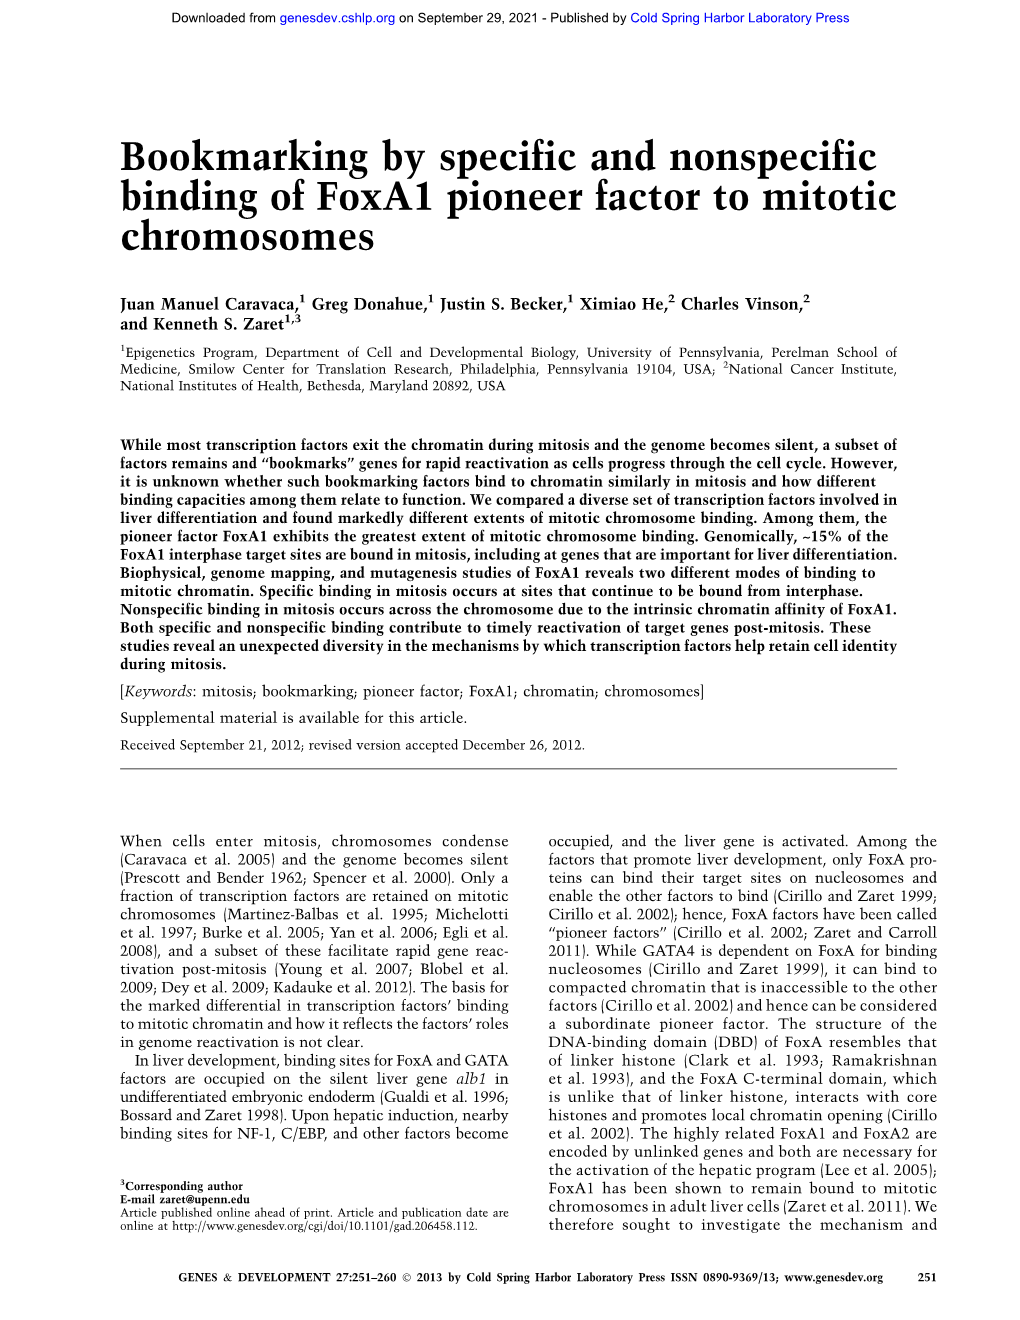 Bookmarking by Specific and Nonspecific Binding of Foxa1 Pioneer Factor to Mitotic Chromosomes